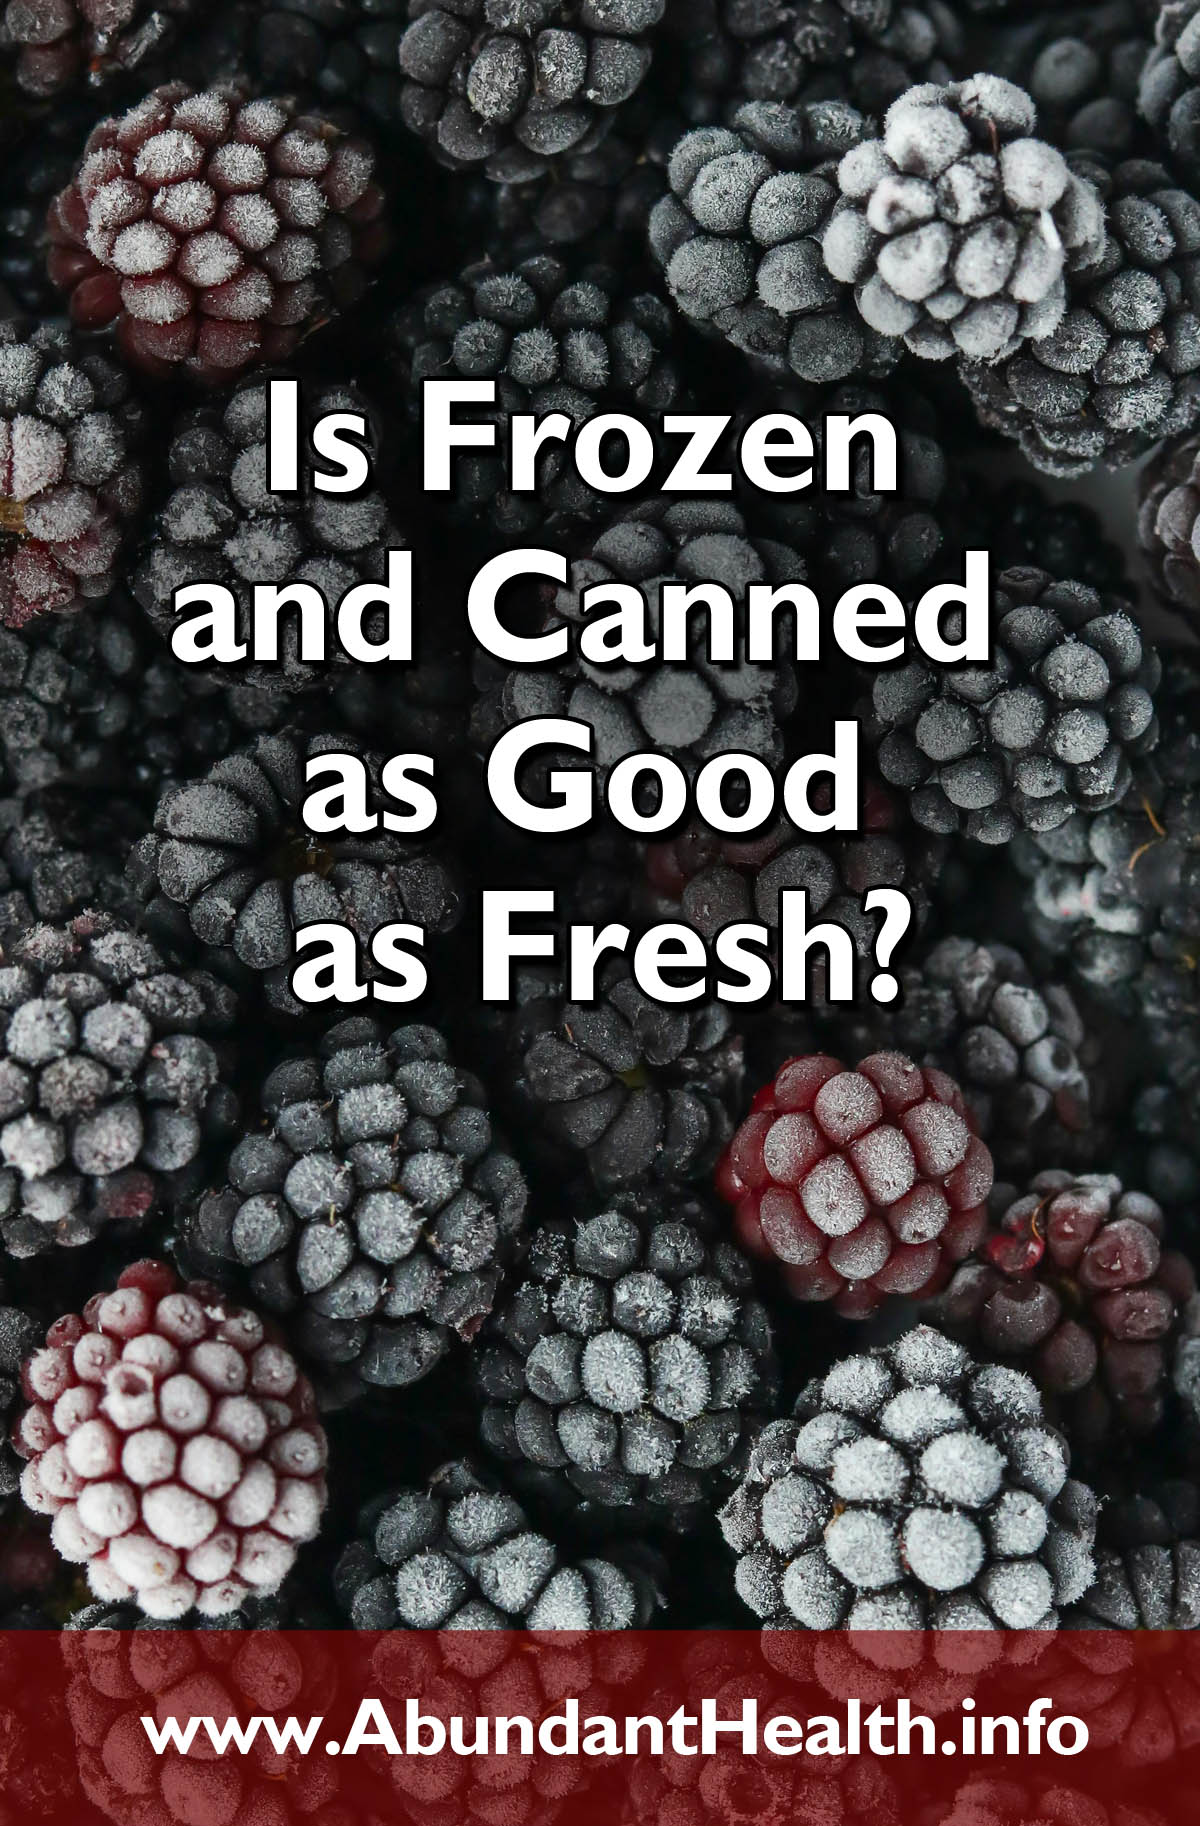 Is Frozen and Tinned as Good as Fresh?